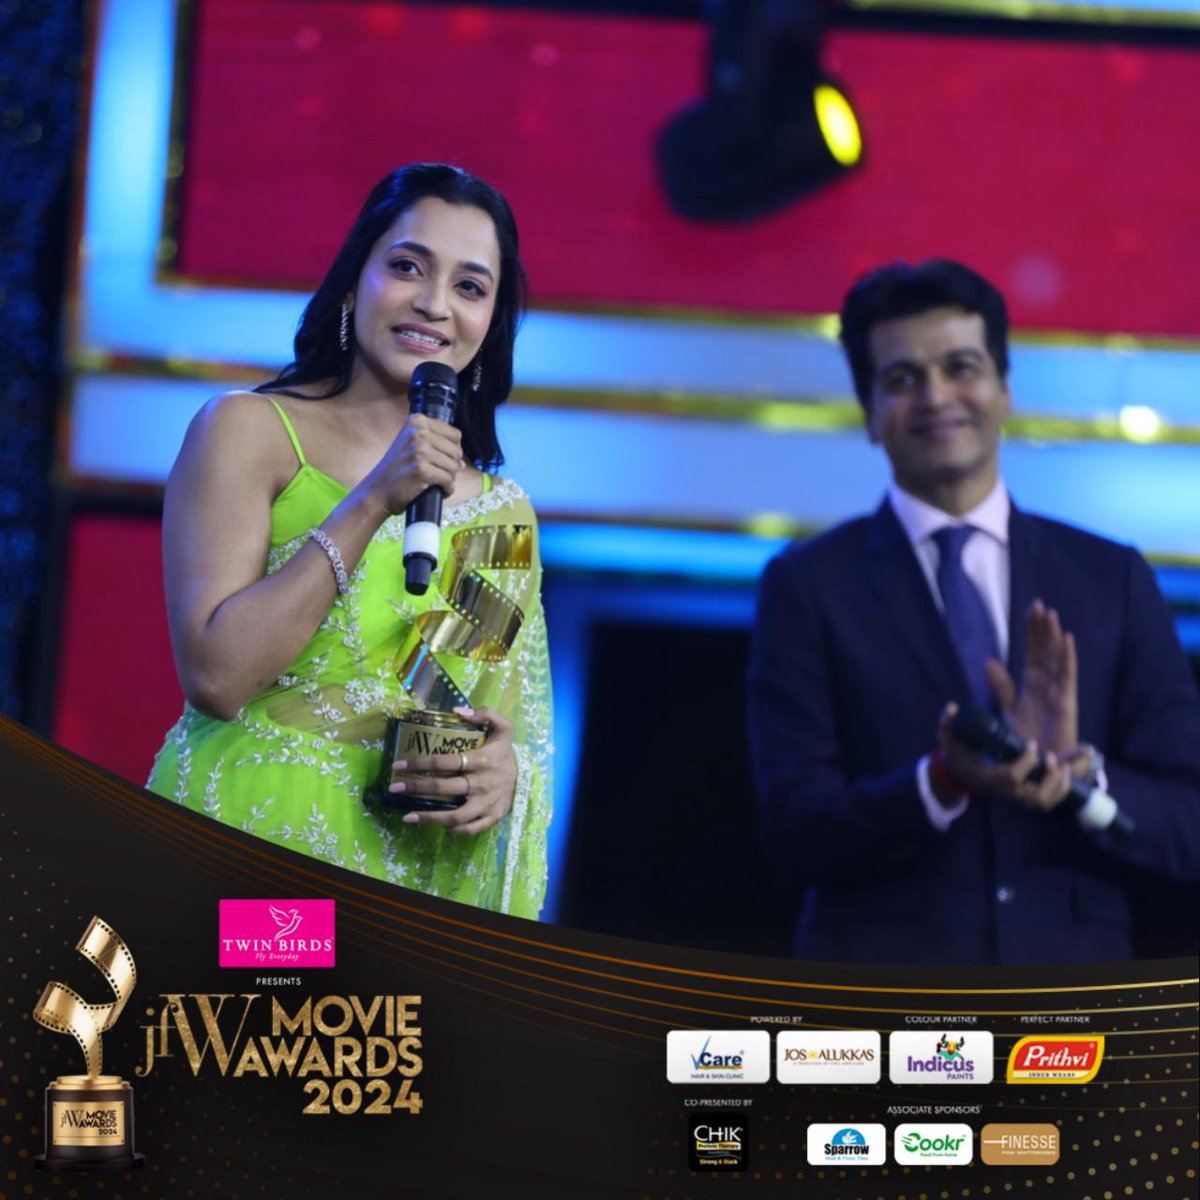 .@abarnathi21 wins Best Actress in a Supporting Role, presented by @VinayRai1809 ! TWITTER: Title sponsor- @twinbirdsonline Powered by - @vcaregroups @josalukkas_ Perfect partner- Prithvi women's inner wear Colour partner - @indicus_in Co-presented by - chik_india Associate